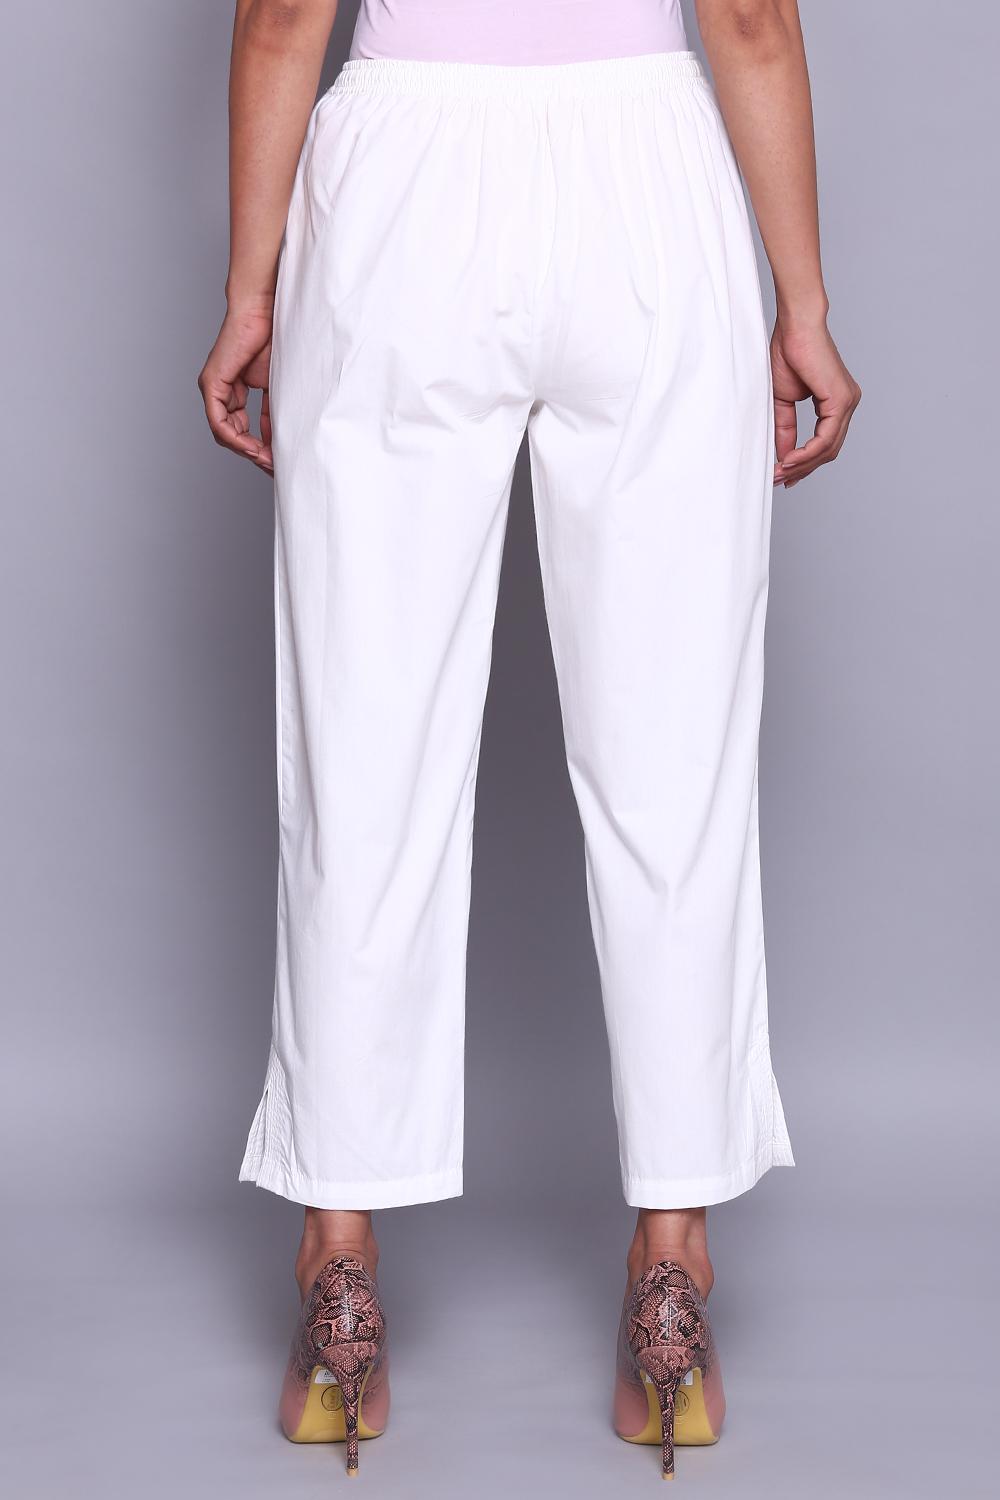 Buy Online Off White Cotton Pants for Women & Girls at Best Prices in ...